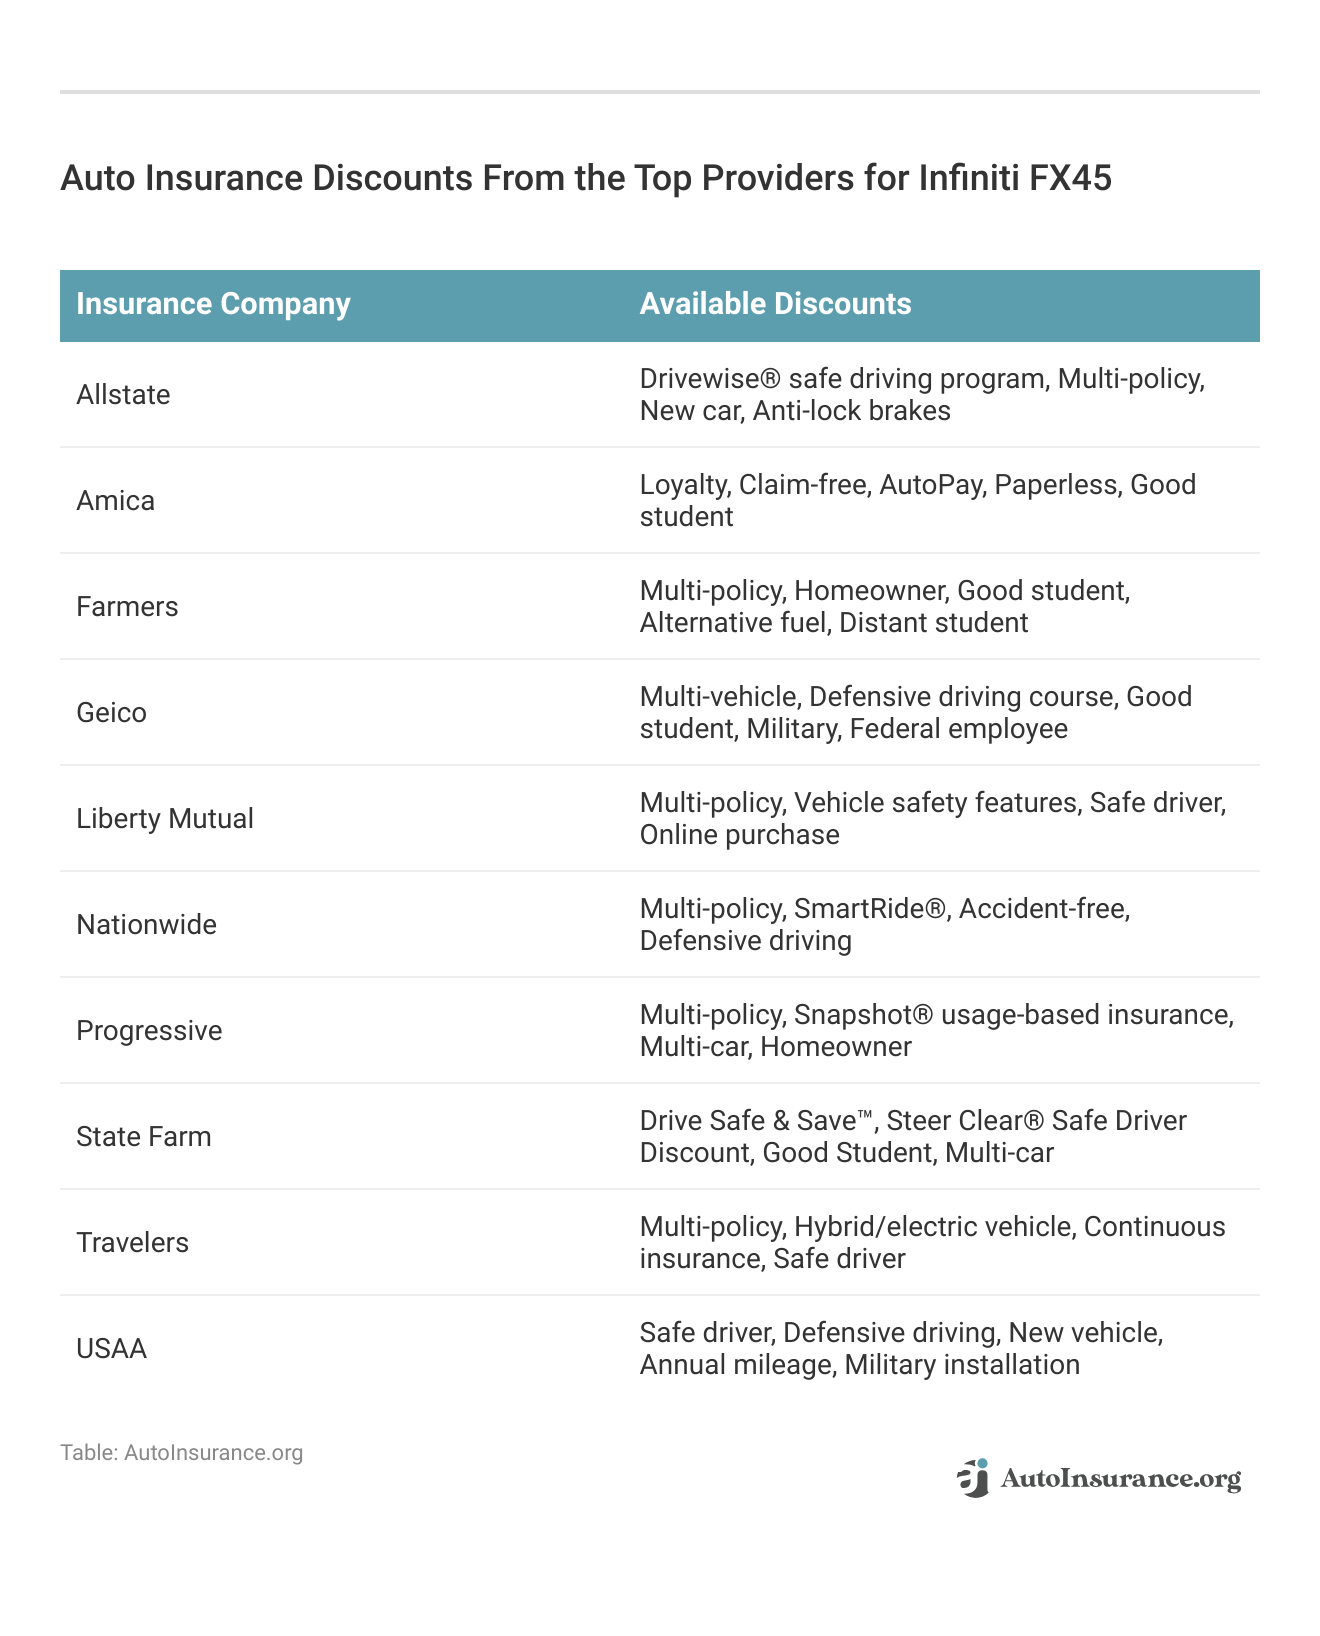 <h3>Auto Insurance Discounts From the Top Providers for Infiniti FX45</h3>